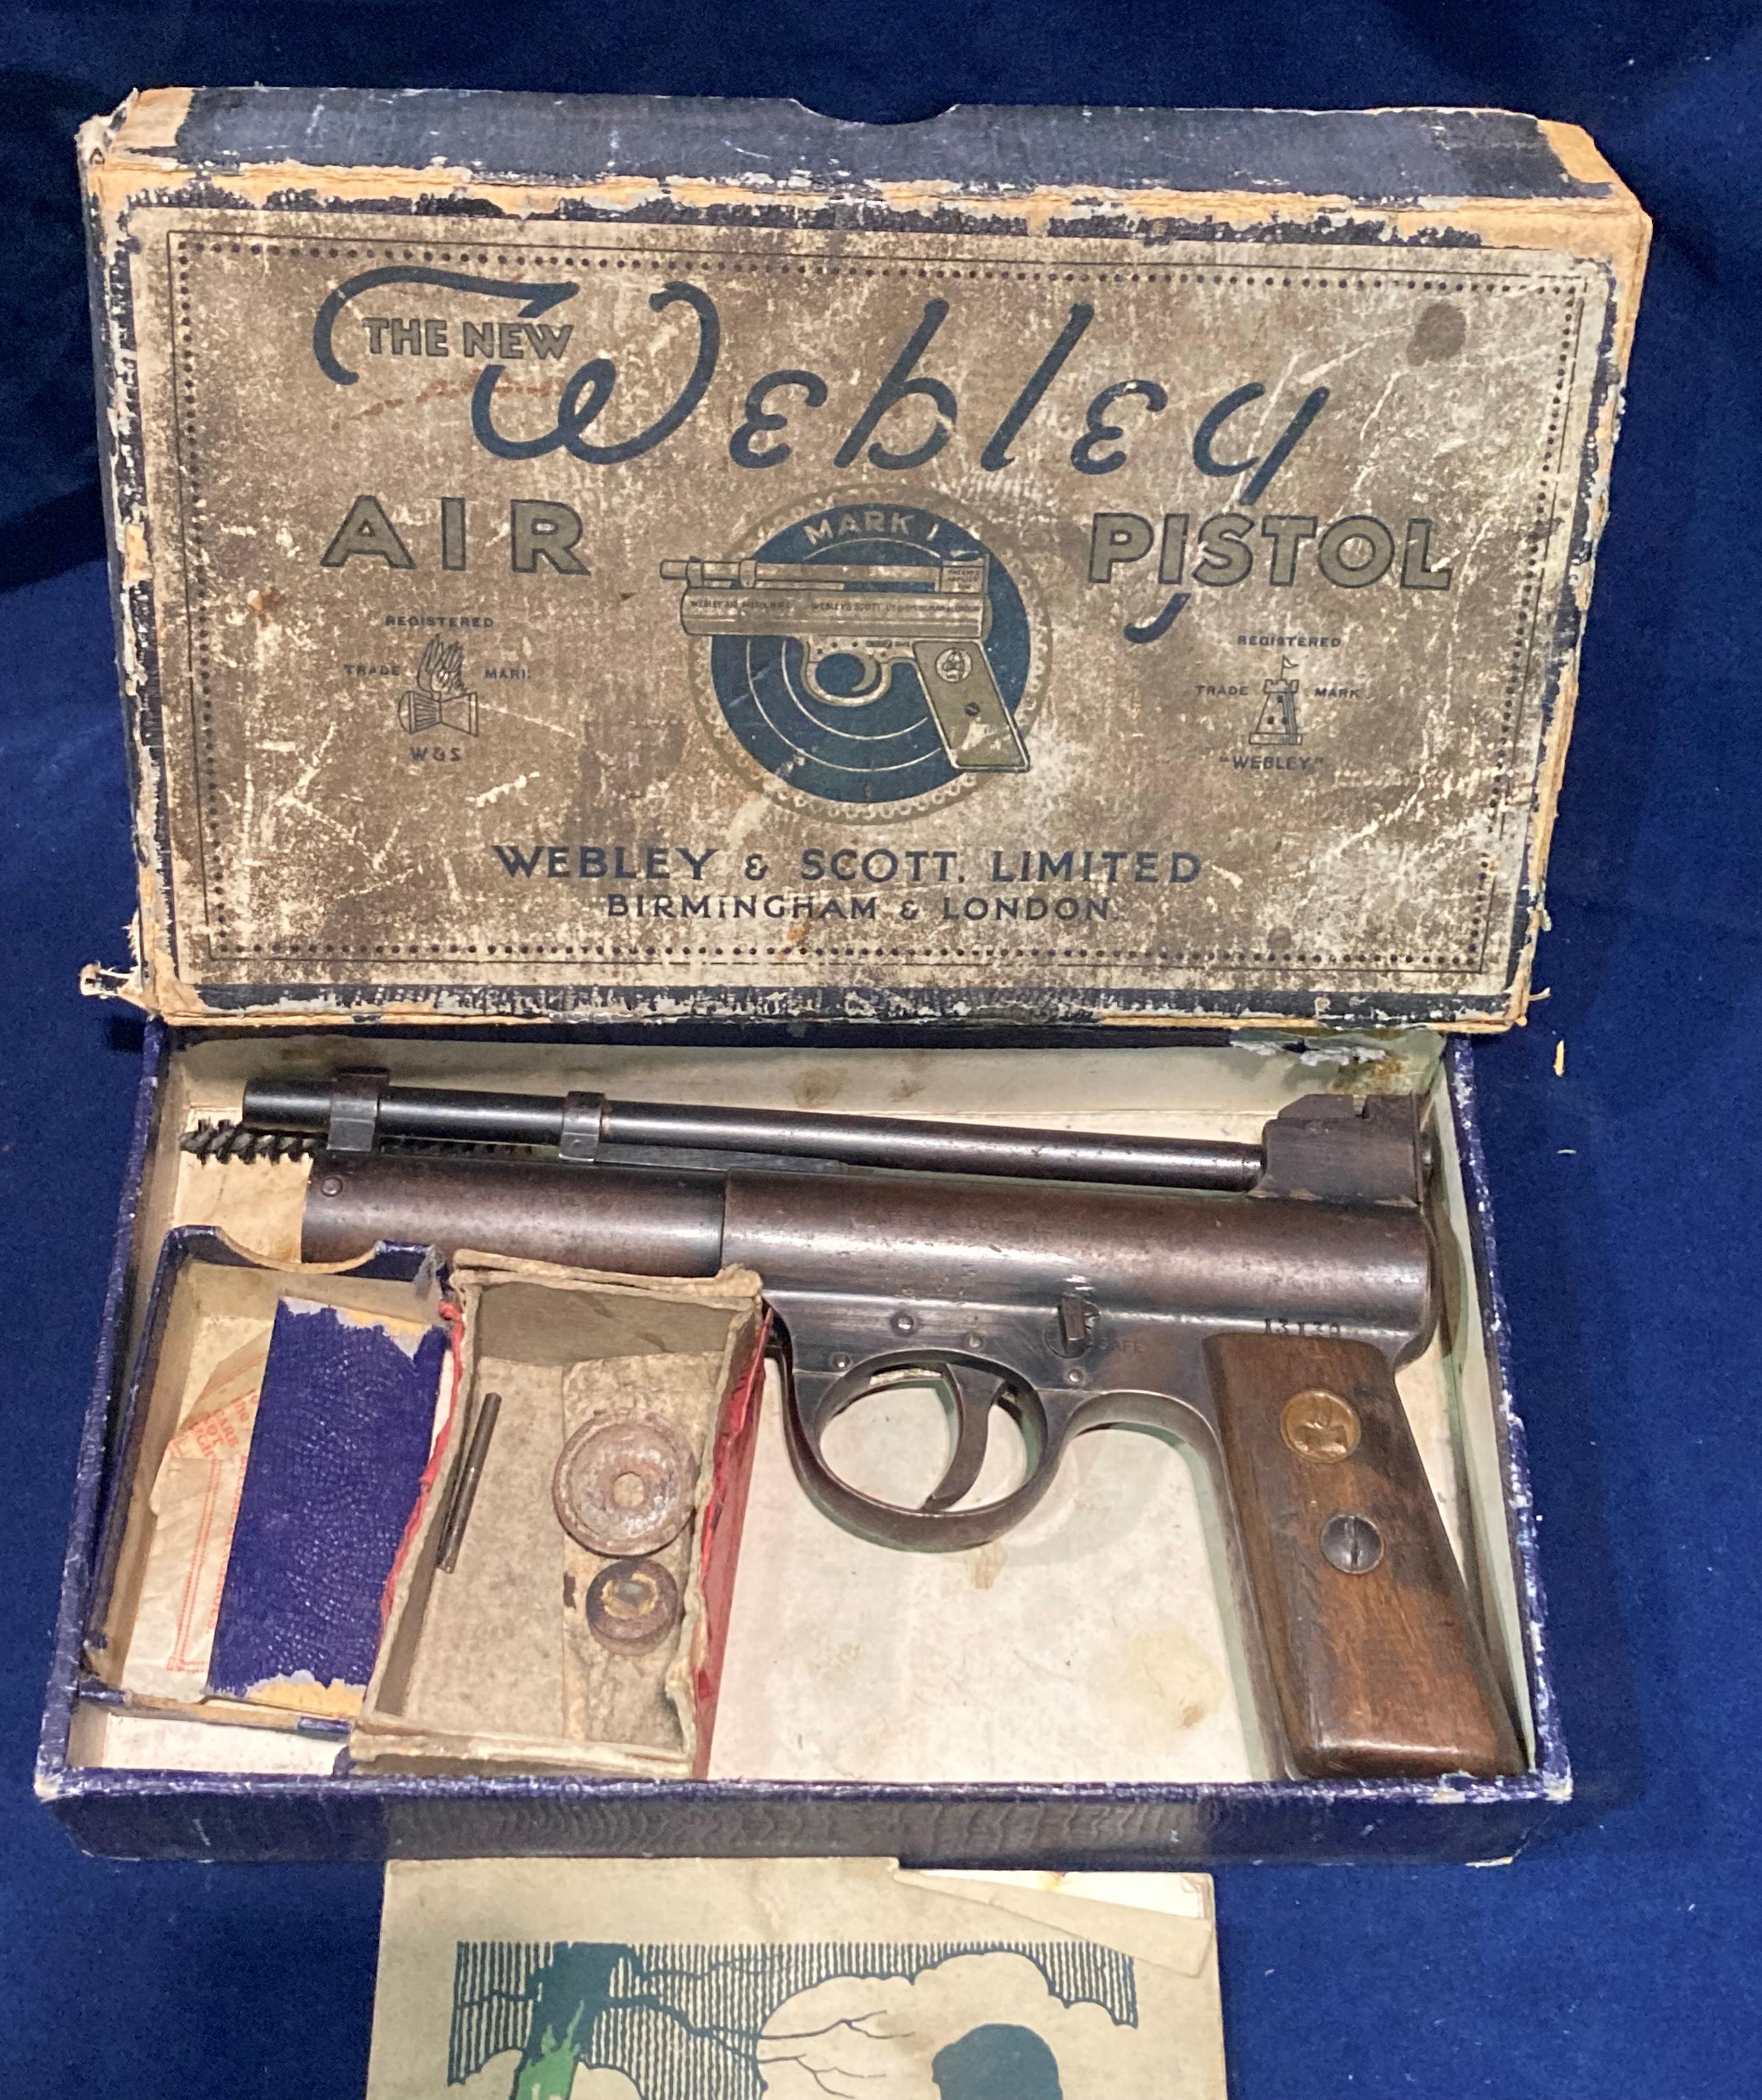 The New Webley Air Pistol Mark 1 complete with manual and box (Saleroom location: S2 counter 3) - Image 2 of 6